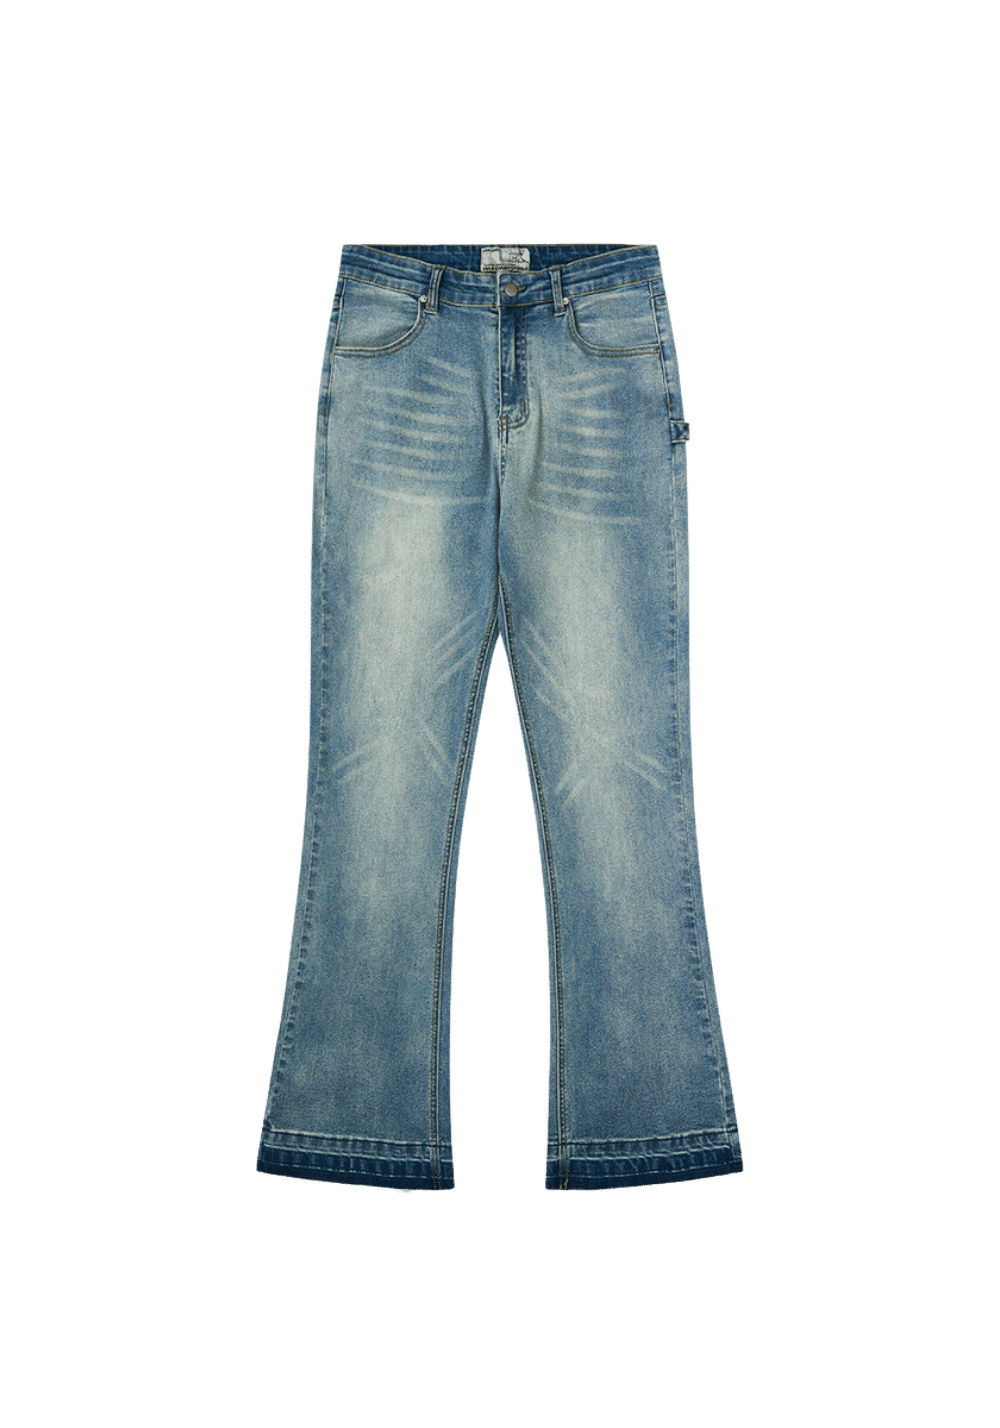 Distressed Vintage Washed Flared Jeans - PSYLOS 1, Distressed Vintage Washed Flared Jeans, Pants, HARSH AND CRUEL, PSYLOS 1